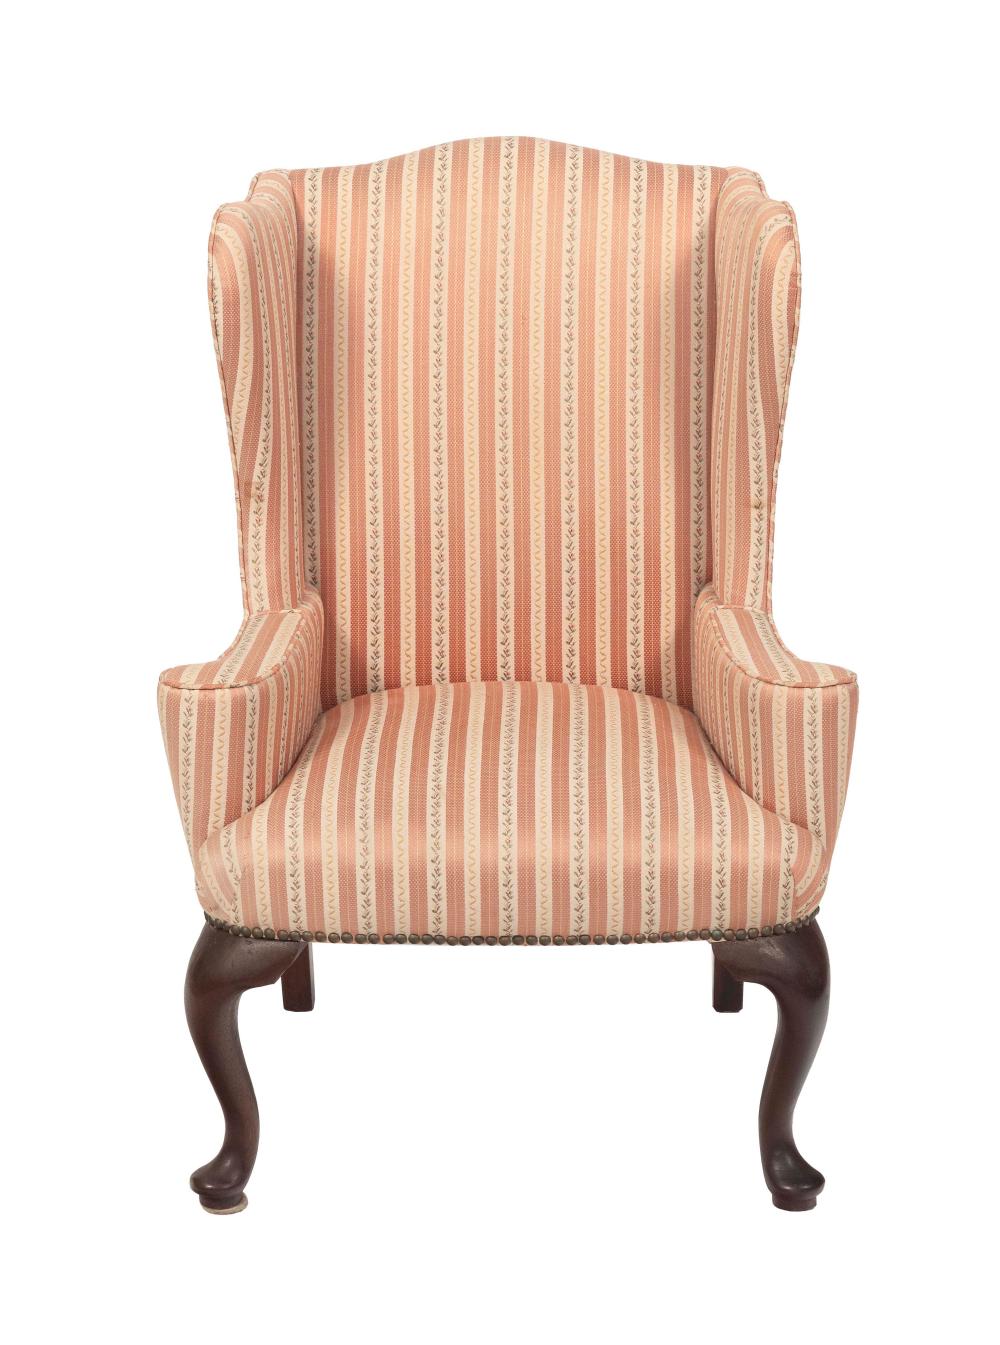 CHILD’S WING CHAIR 19TH CENTURY